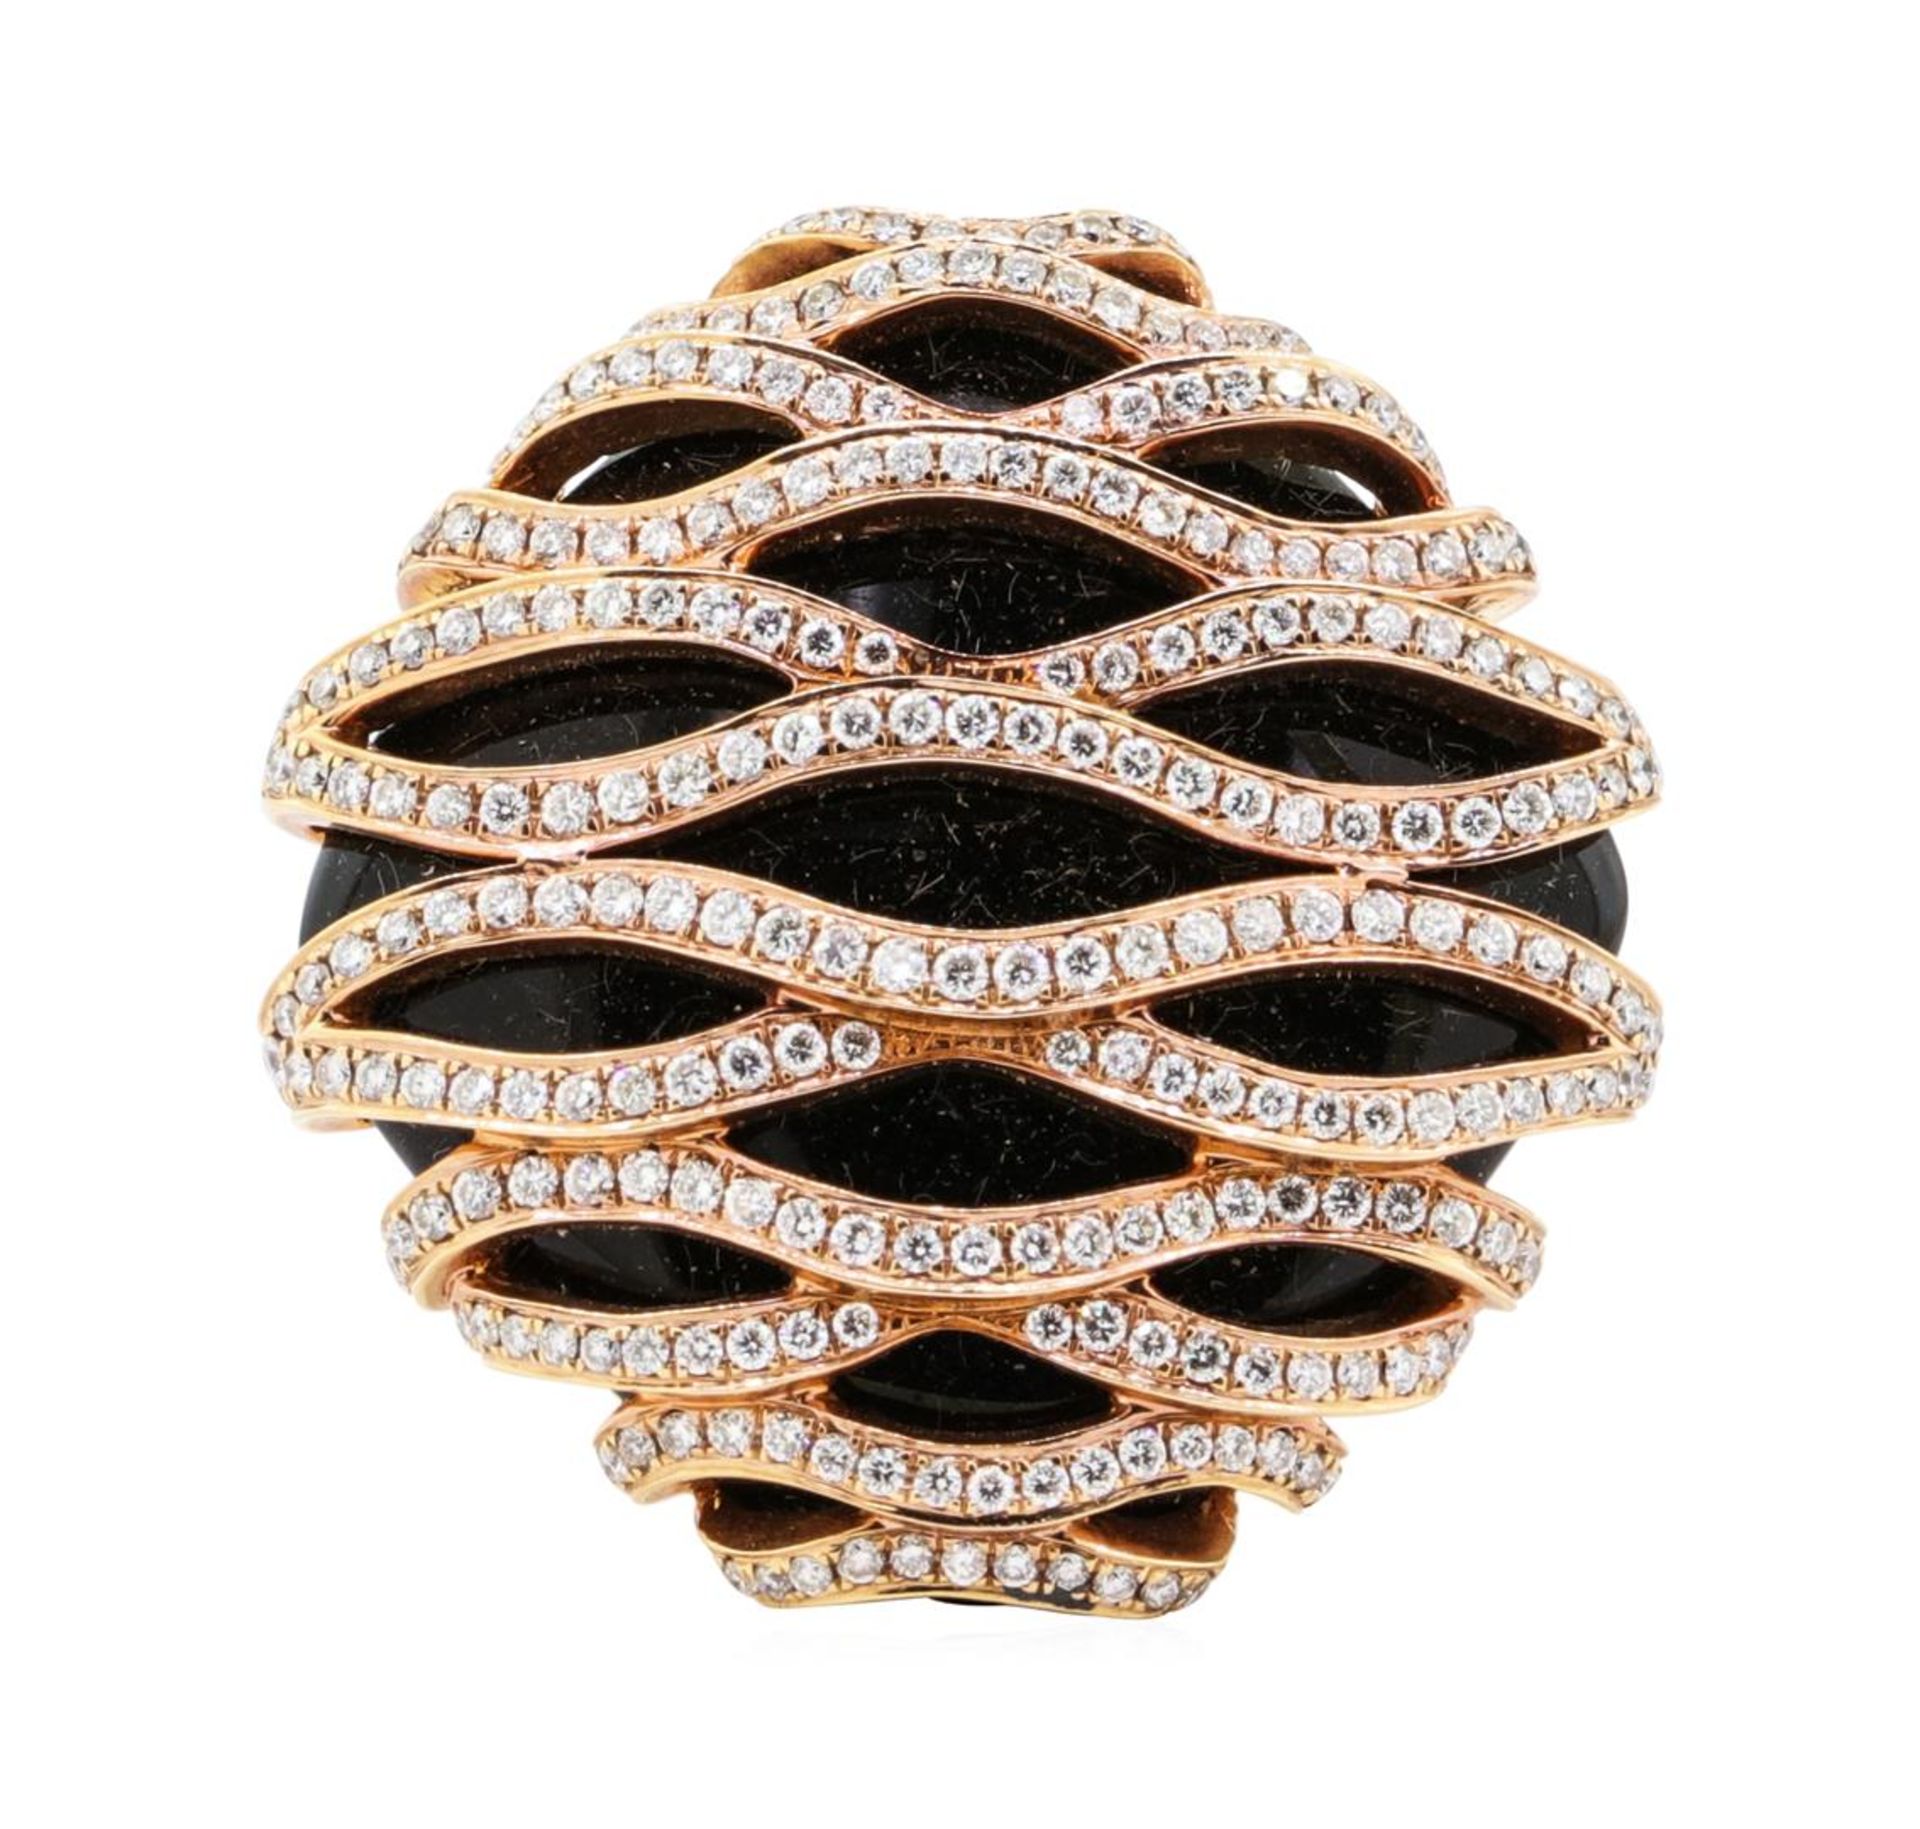 1.65 ctw Diamond and Onyx Ring - 18KT Rose Gold - Image 2 of 4